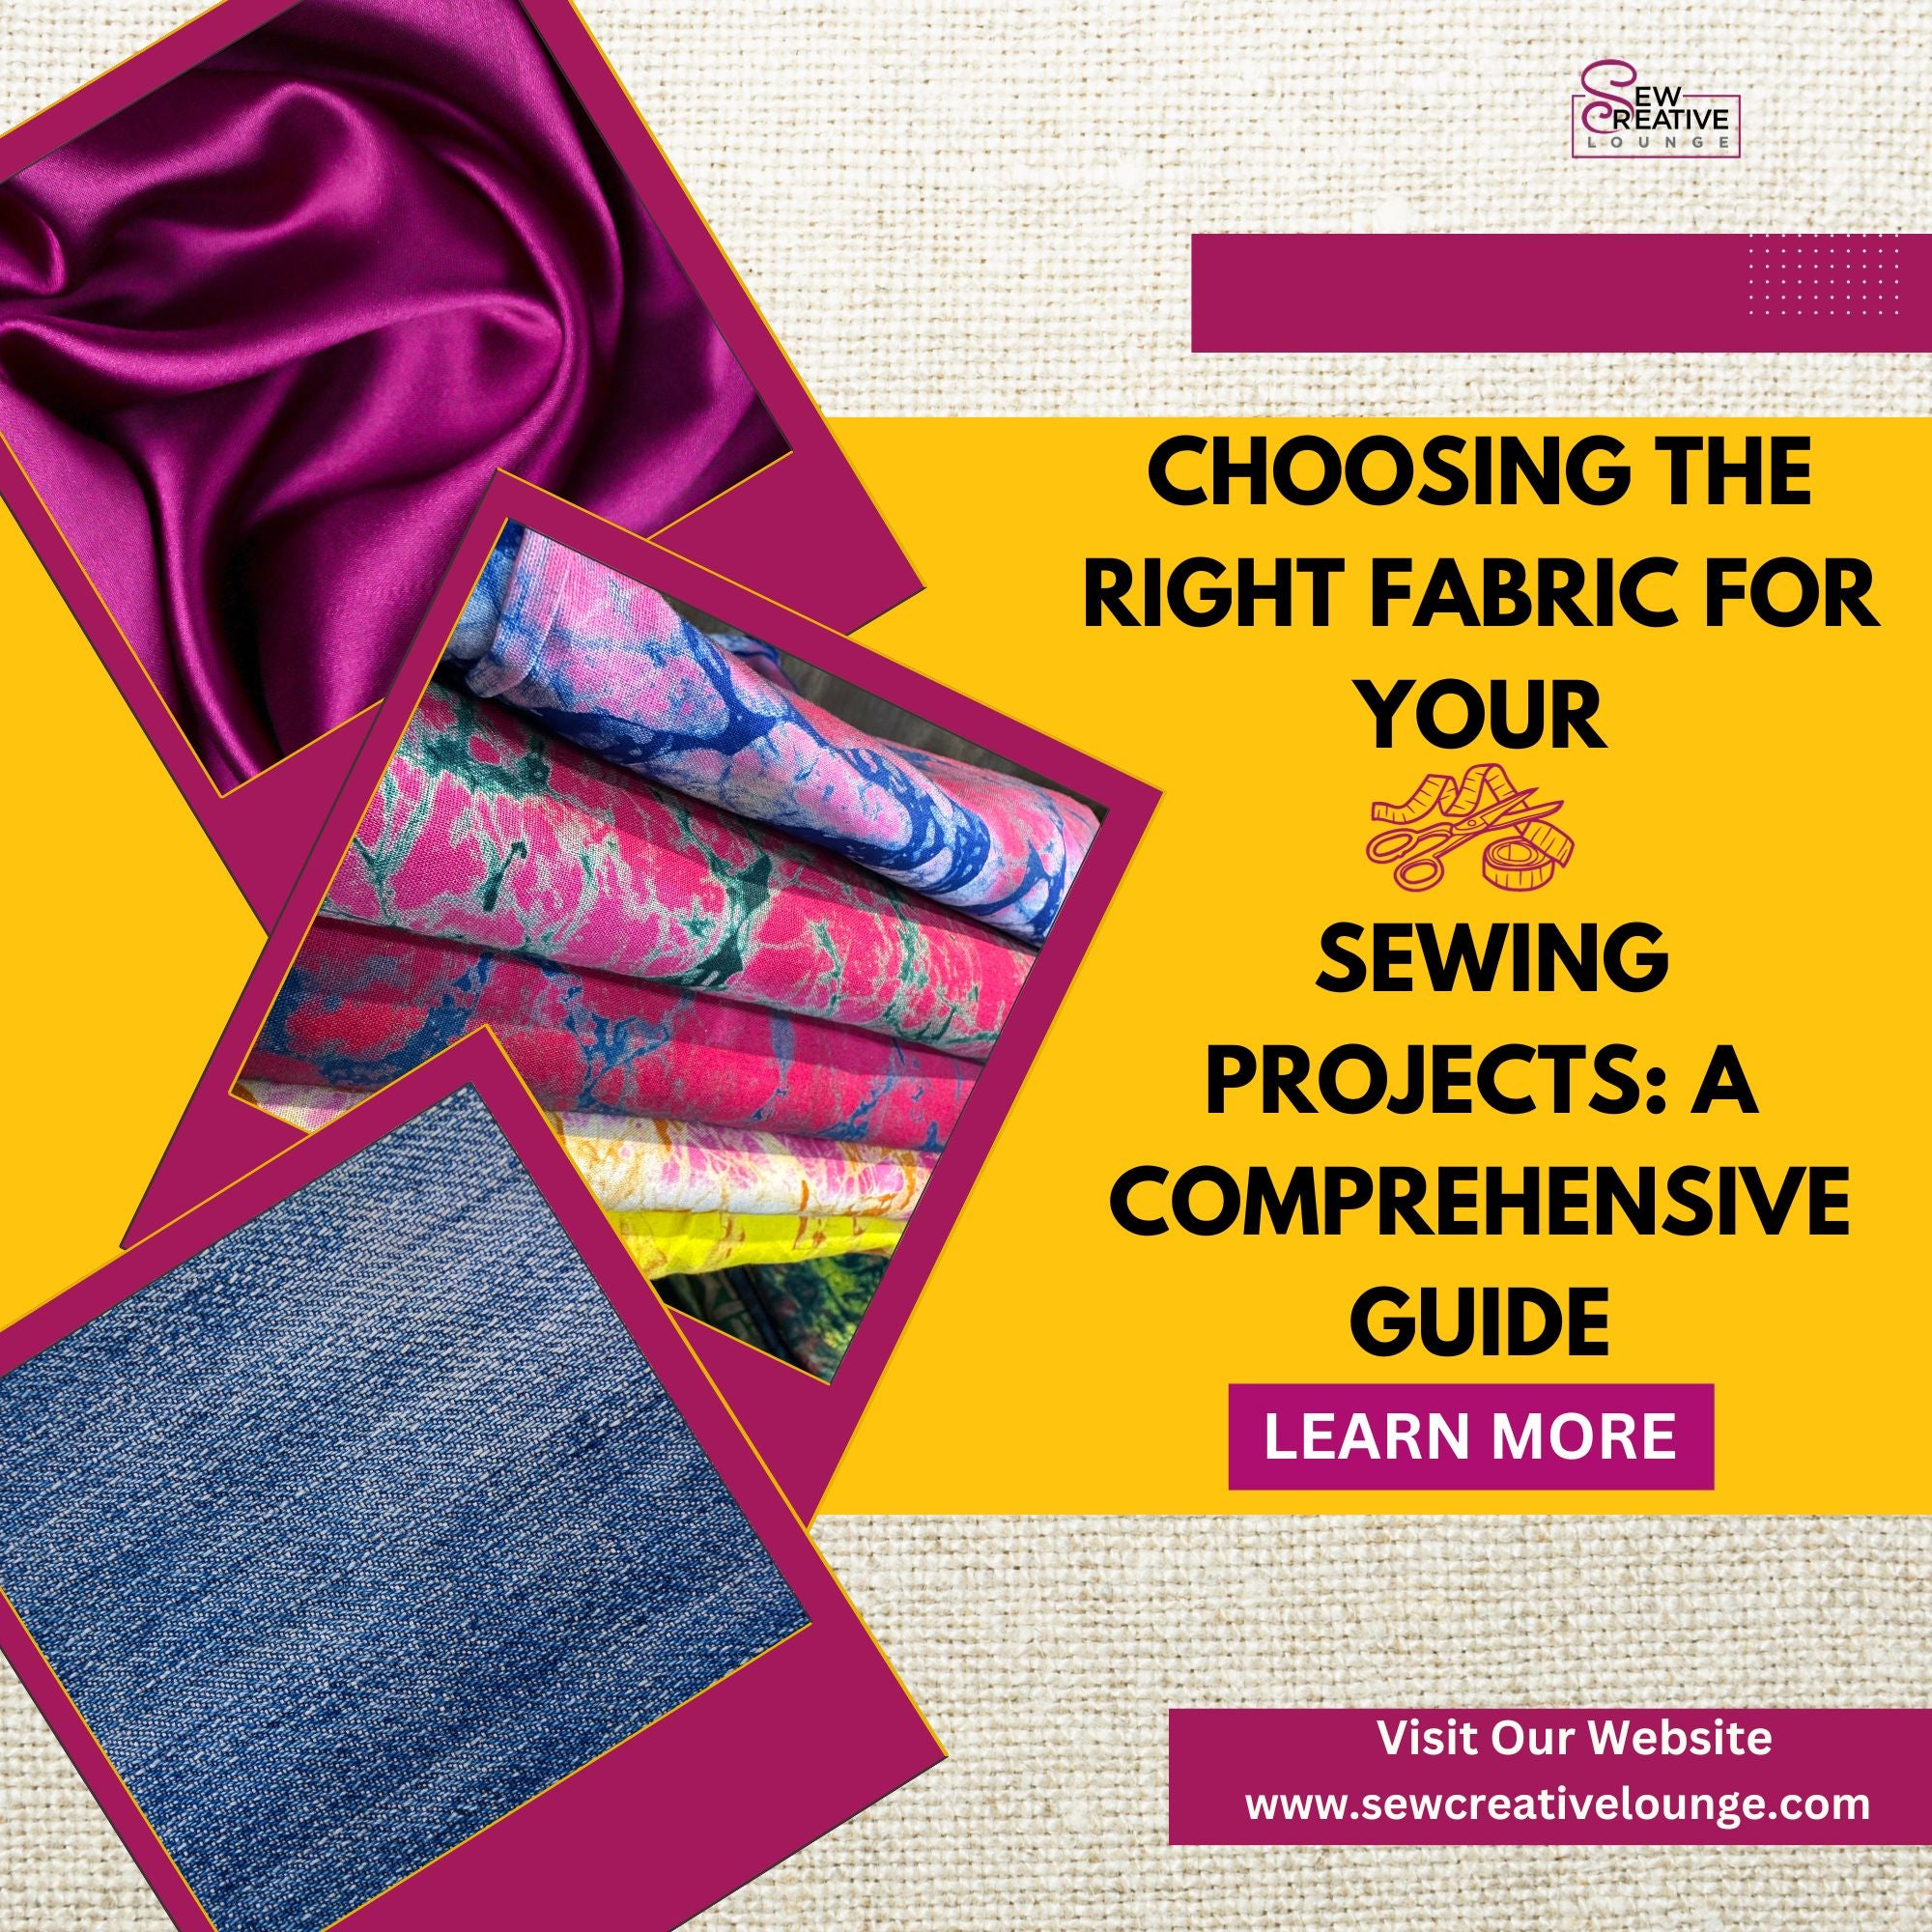 Choosing the Right Fabric for Your Sewing Projects: A Comprehensive Guide